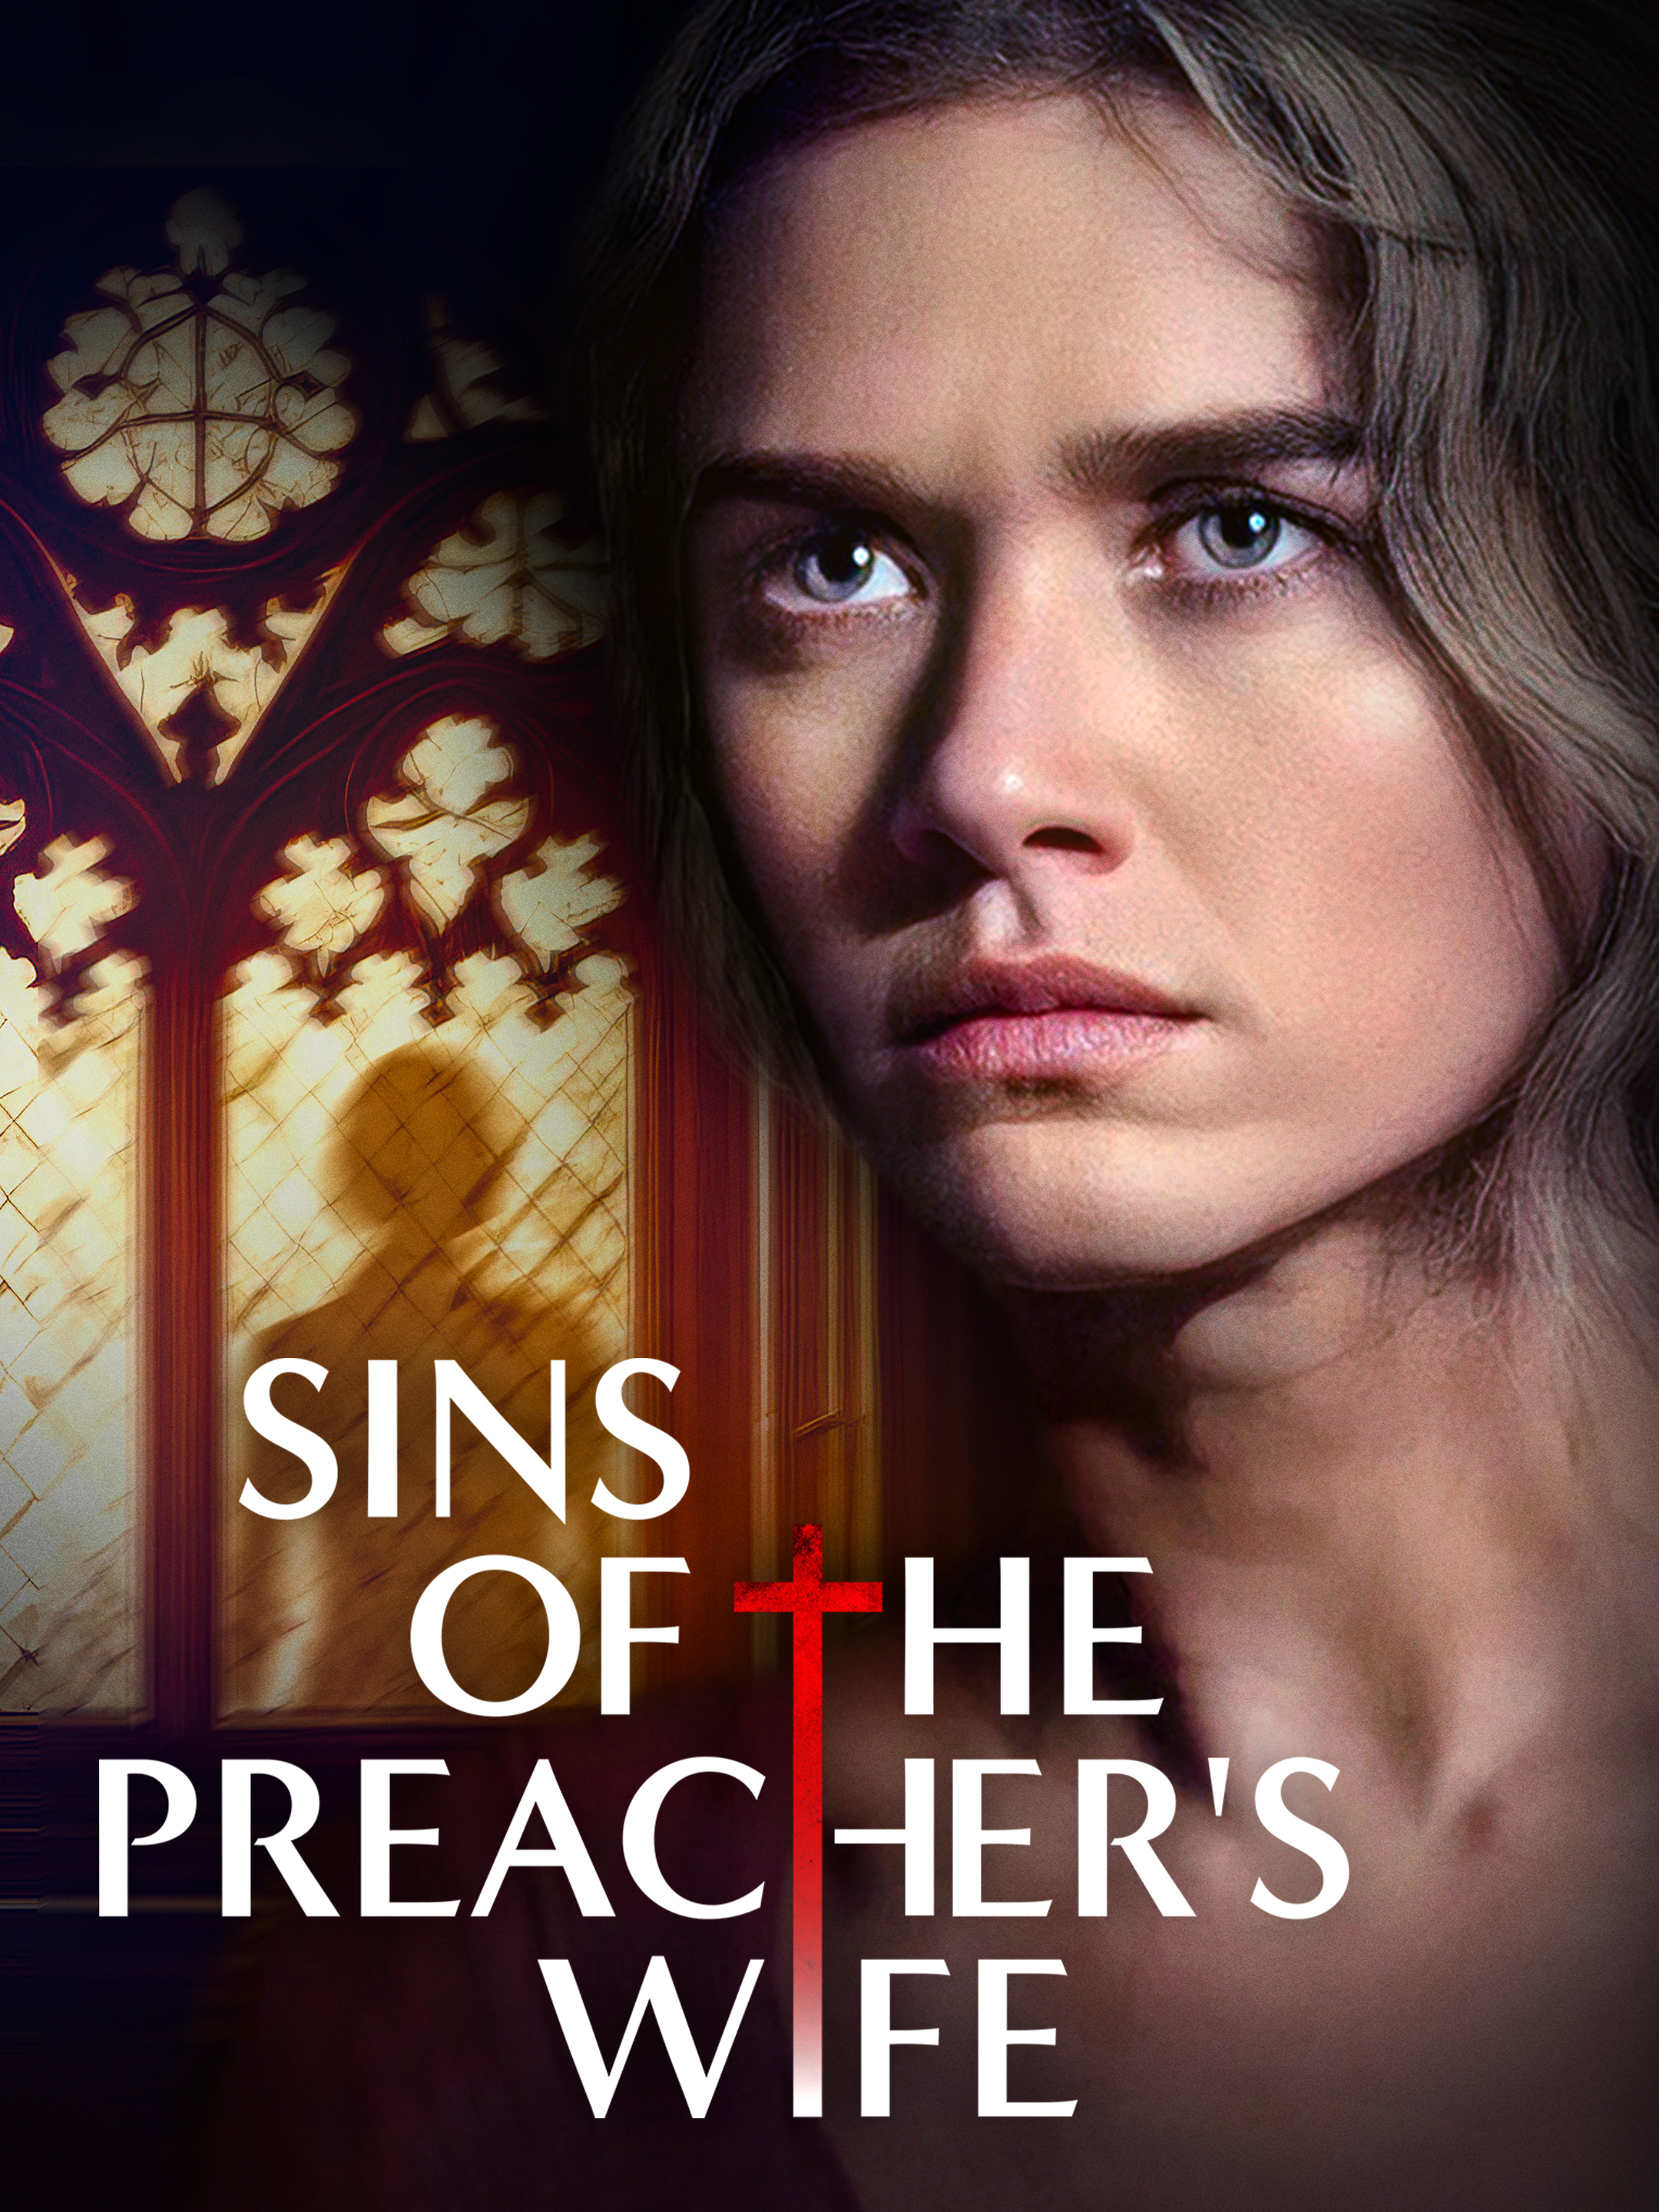 Sins of the Preachers Wife pic